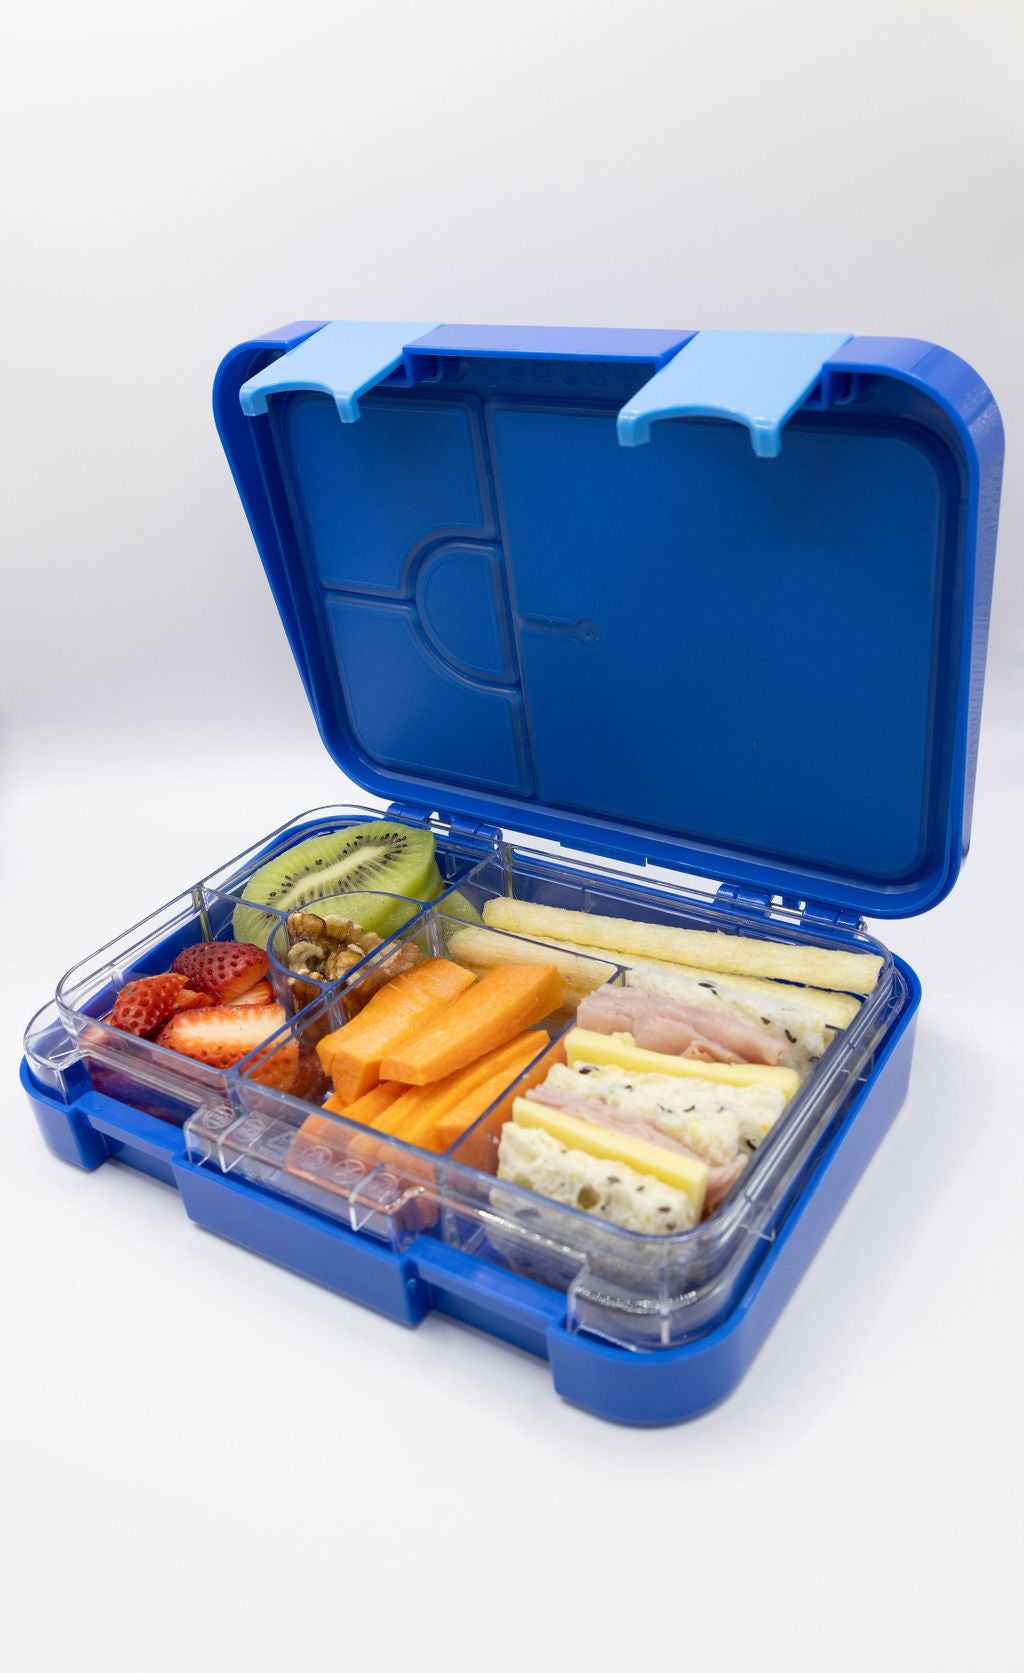 Noonys bailey bento lunchbox - ocean blue filled with lunch items